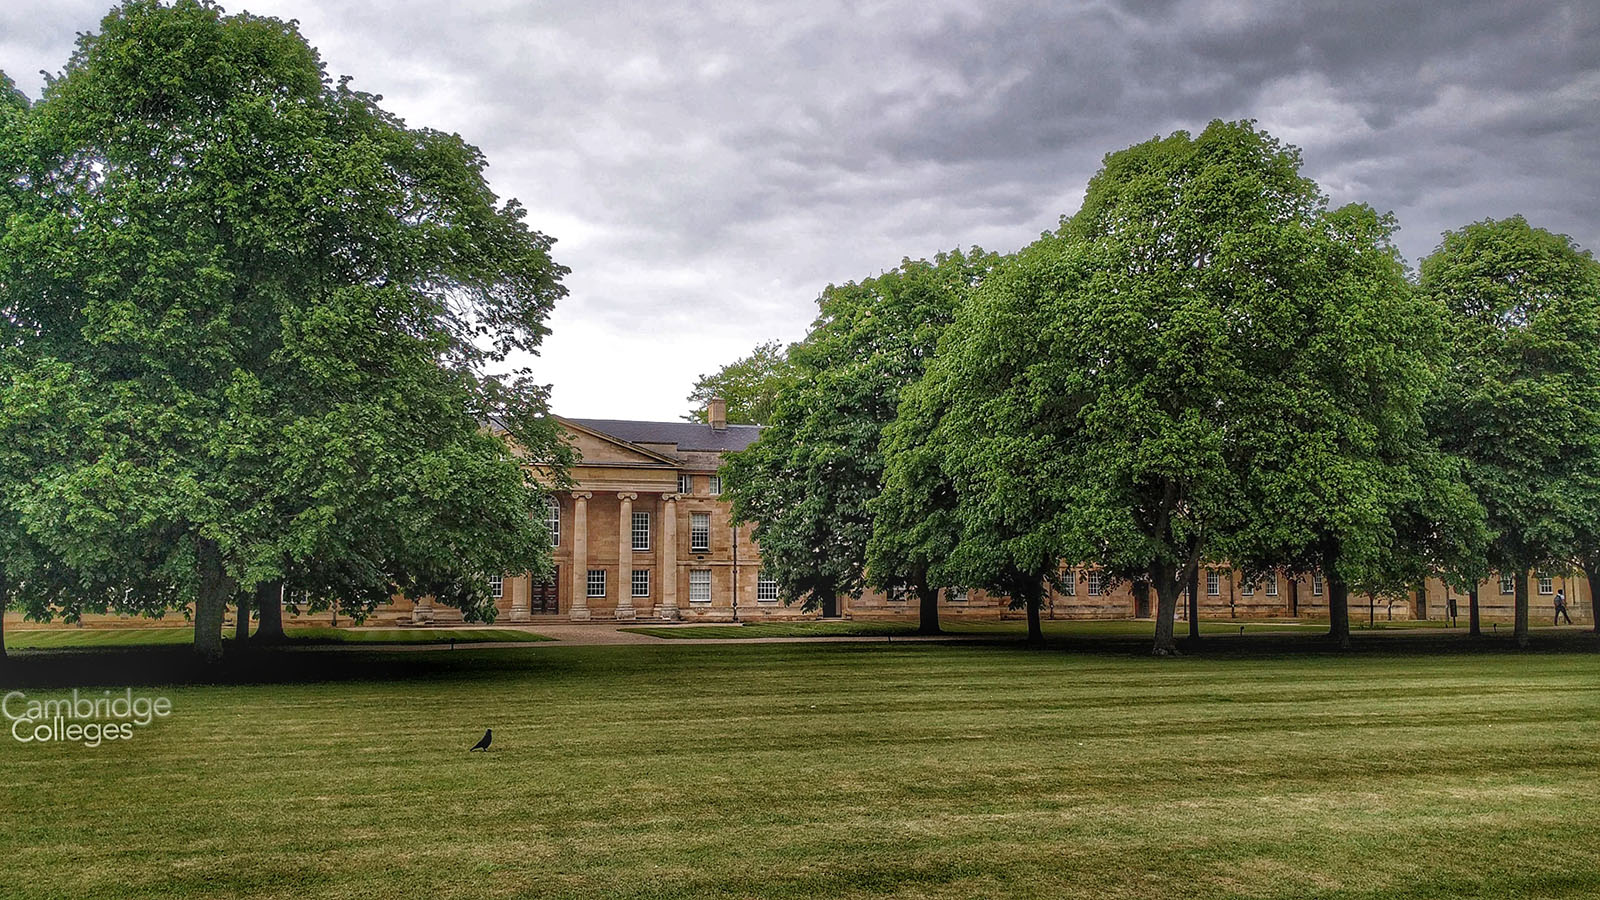 Magnificent trees in the grounds of Downing college